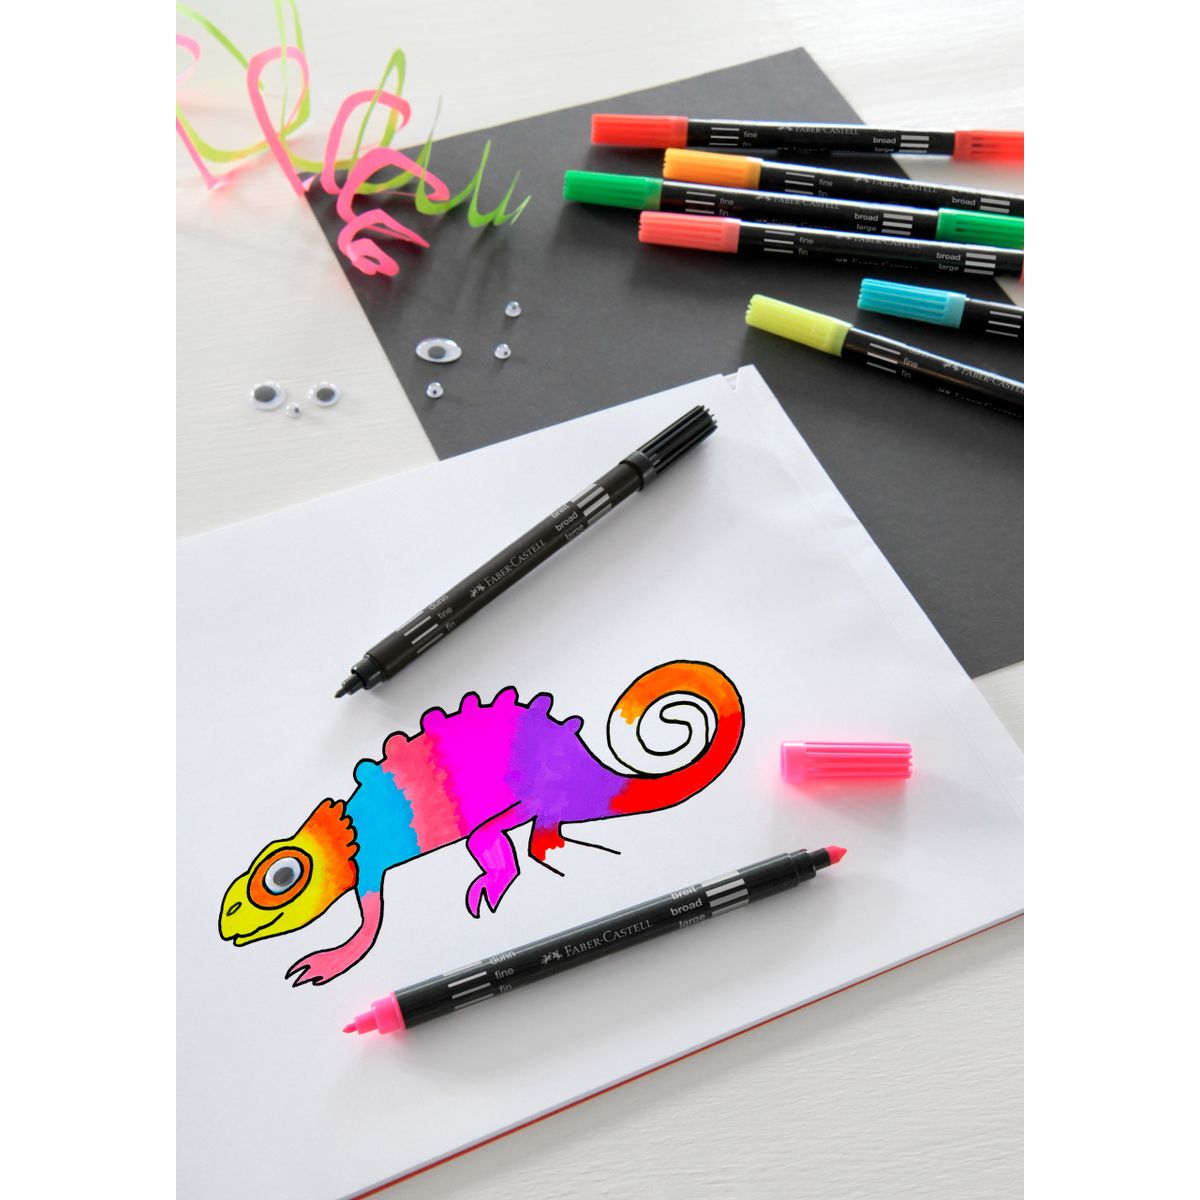 Flamaster Faber Castell Neon 10 kol. (FC151109 FC)